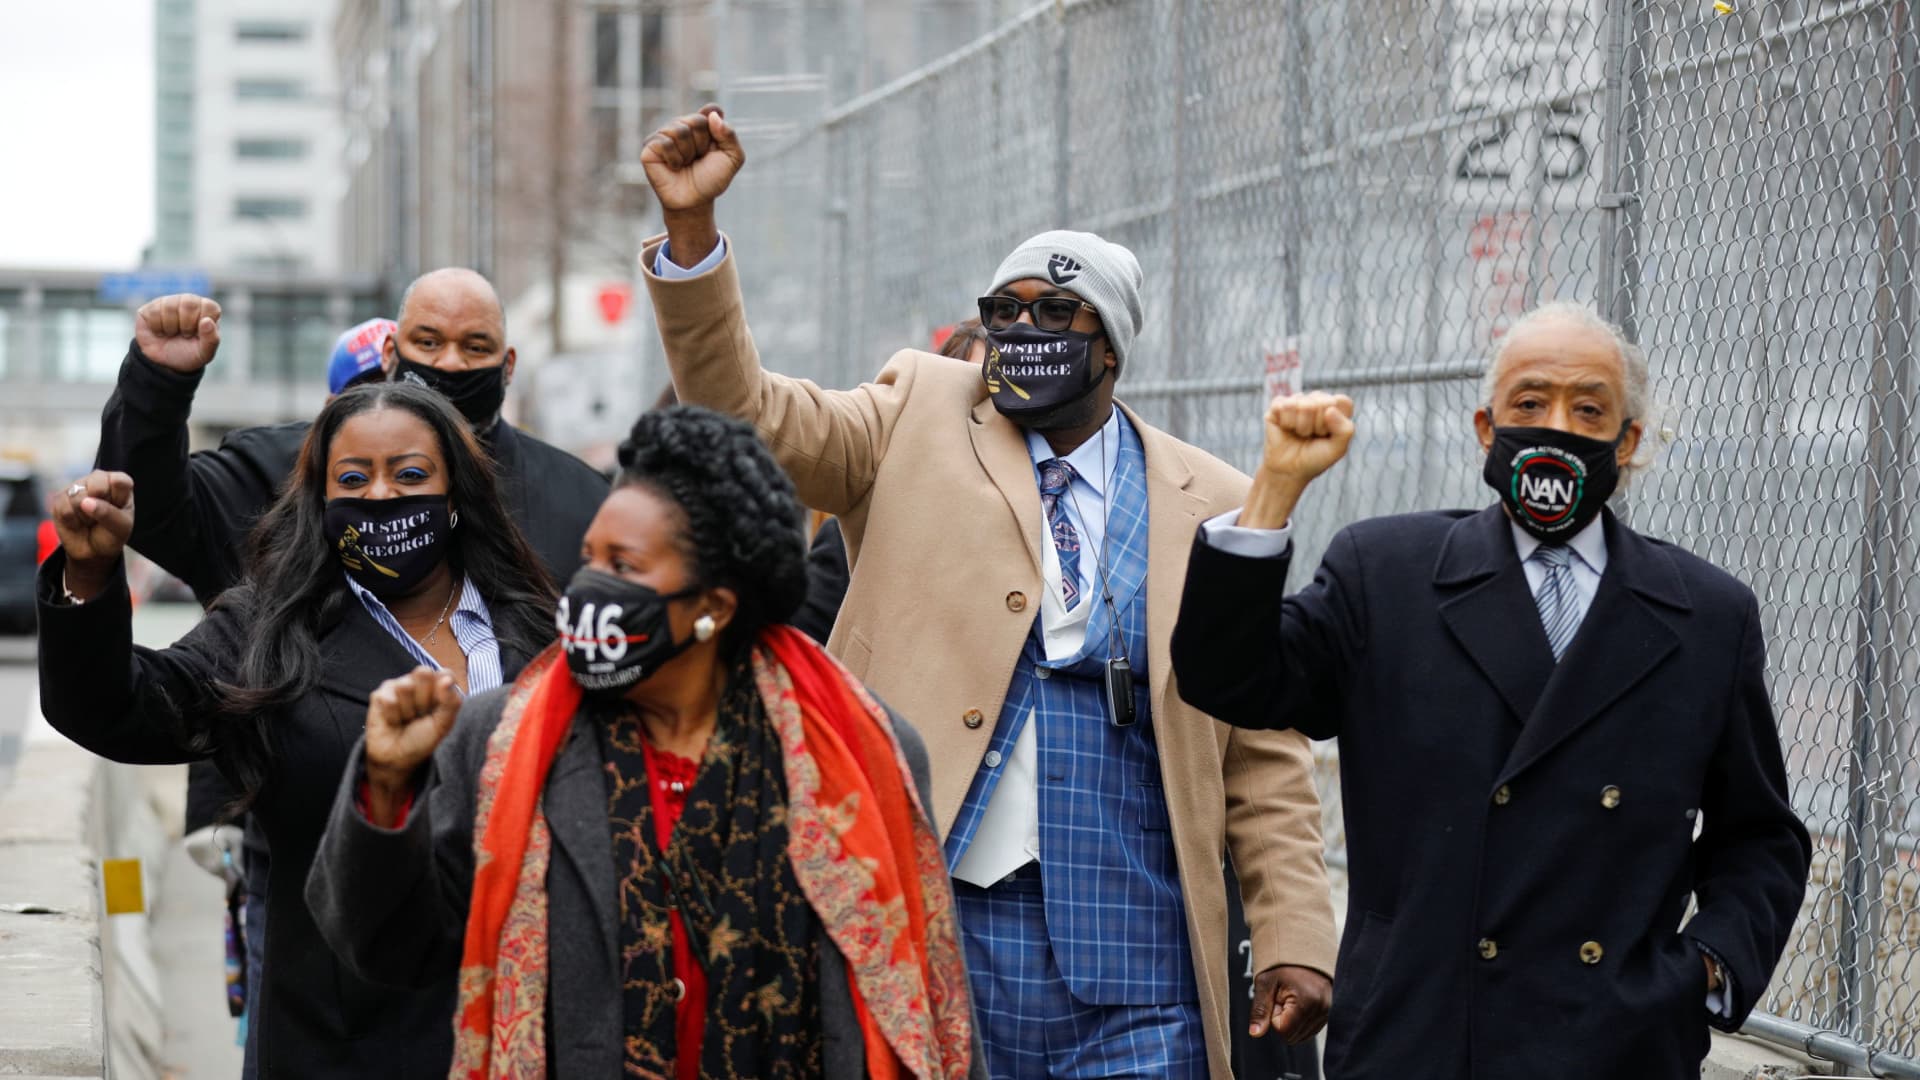 The Floyd family and Reverend Al Sharpton gesture as they arrive at the Hennepin County Government Center for closing statements in the trial of former police officer Derek Chauvin, who is facing murder charges in the death of George Floyd, in Minneapolis, Minnesota, U.S., April 19, 2021.